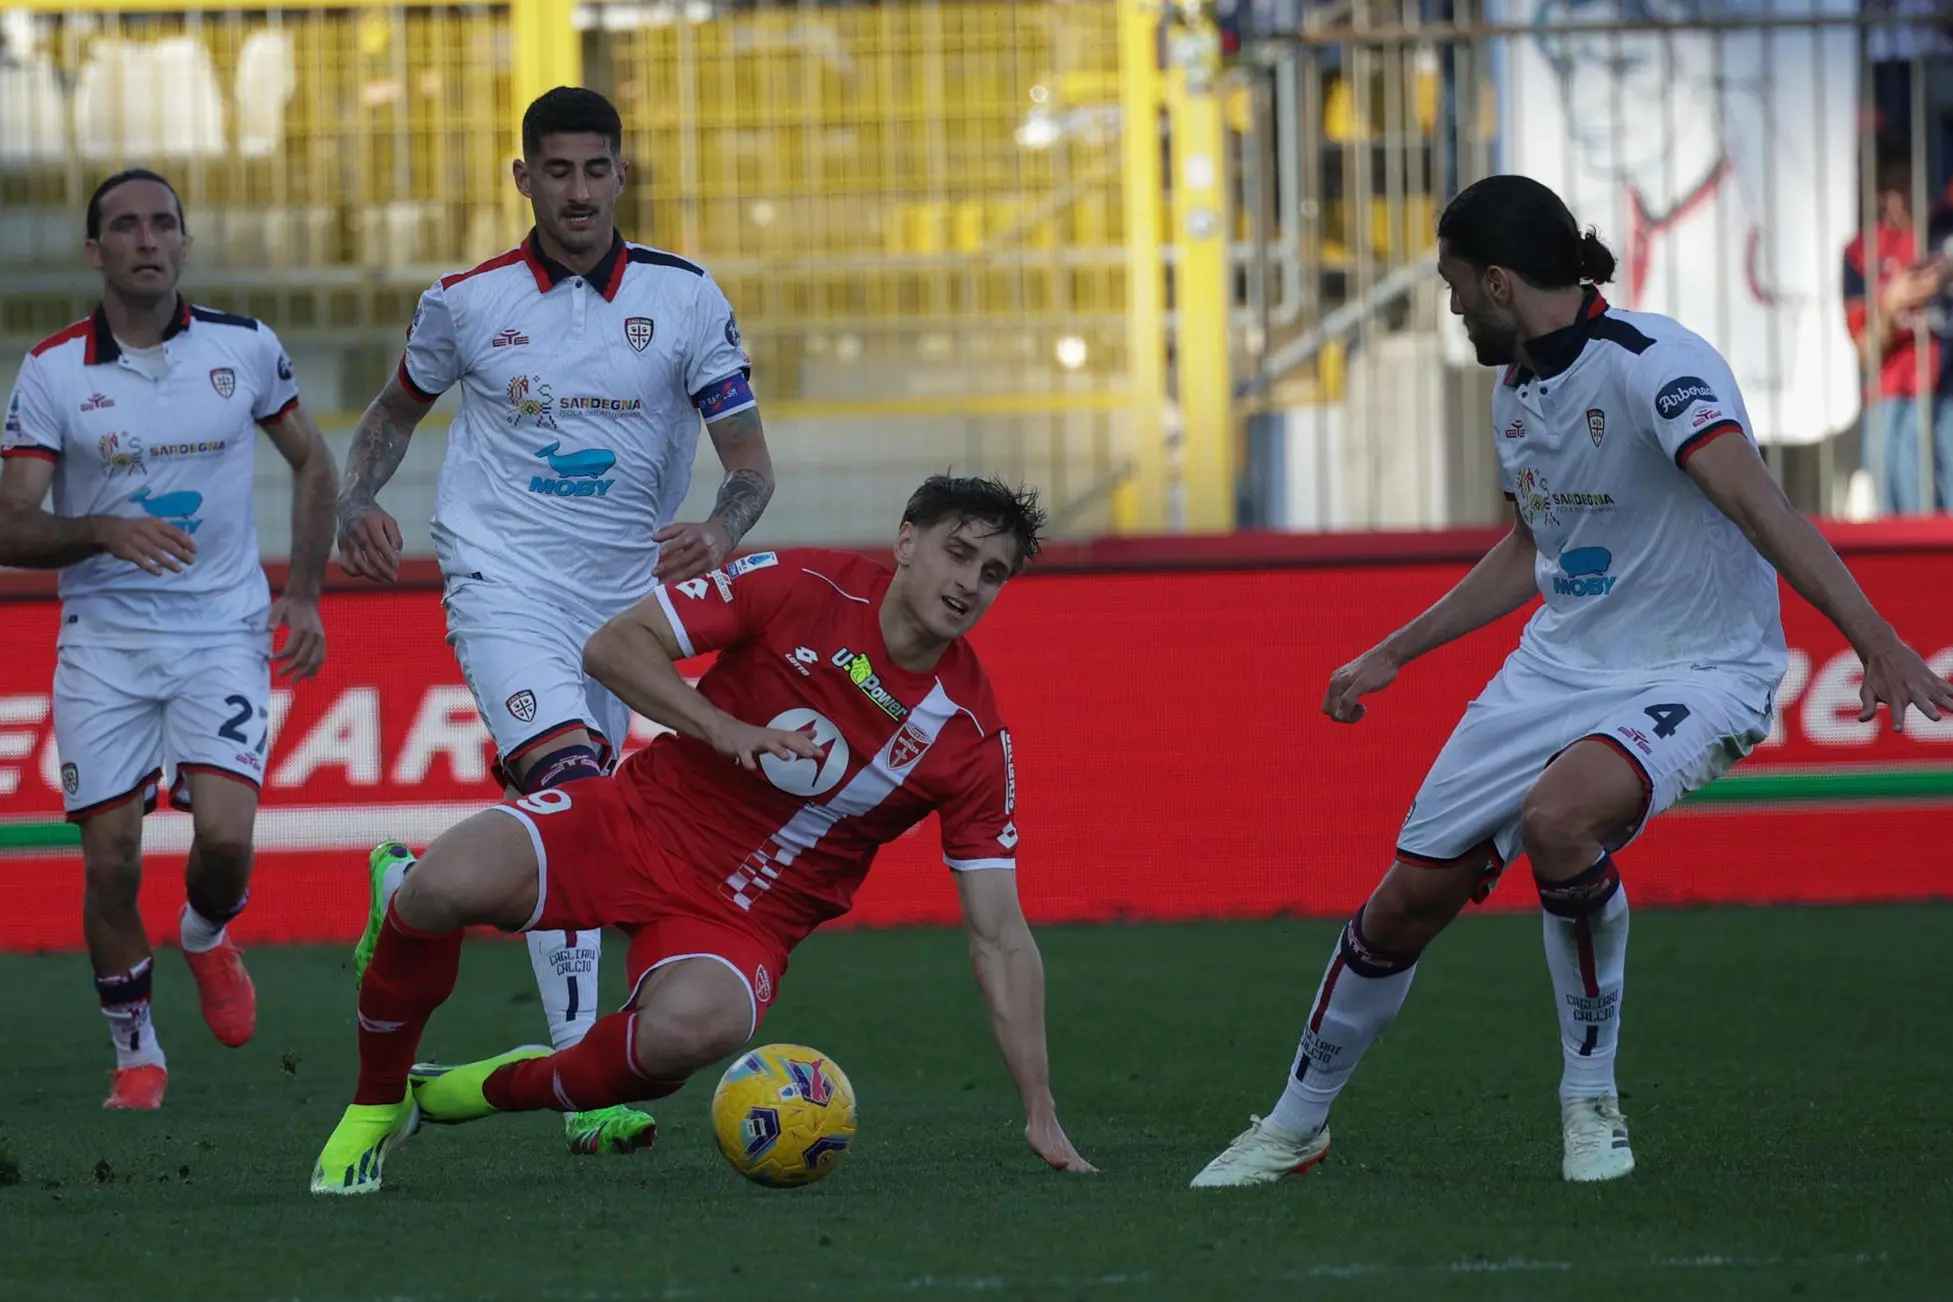 A moment from the match between Monza and Cagliari (Ansa)